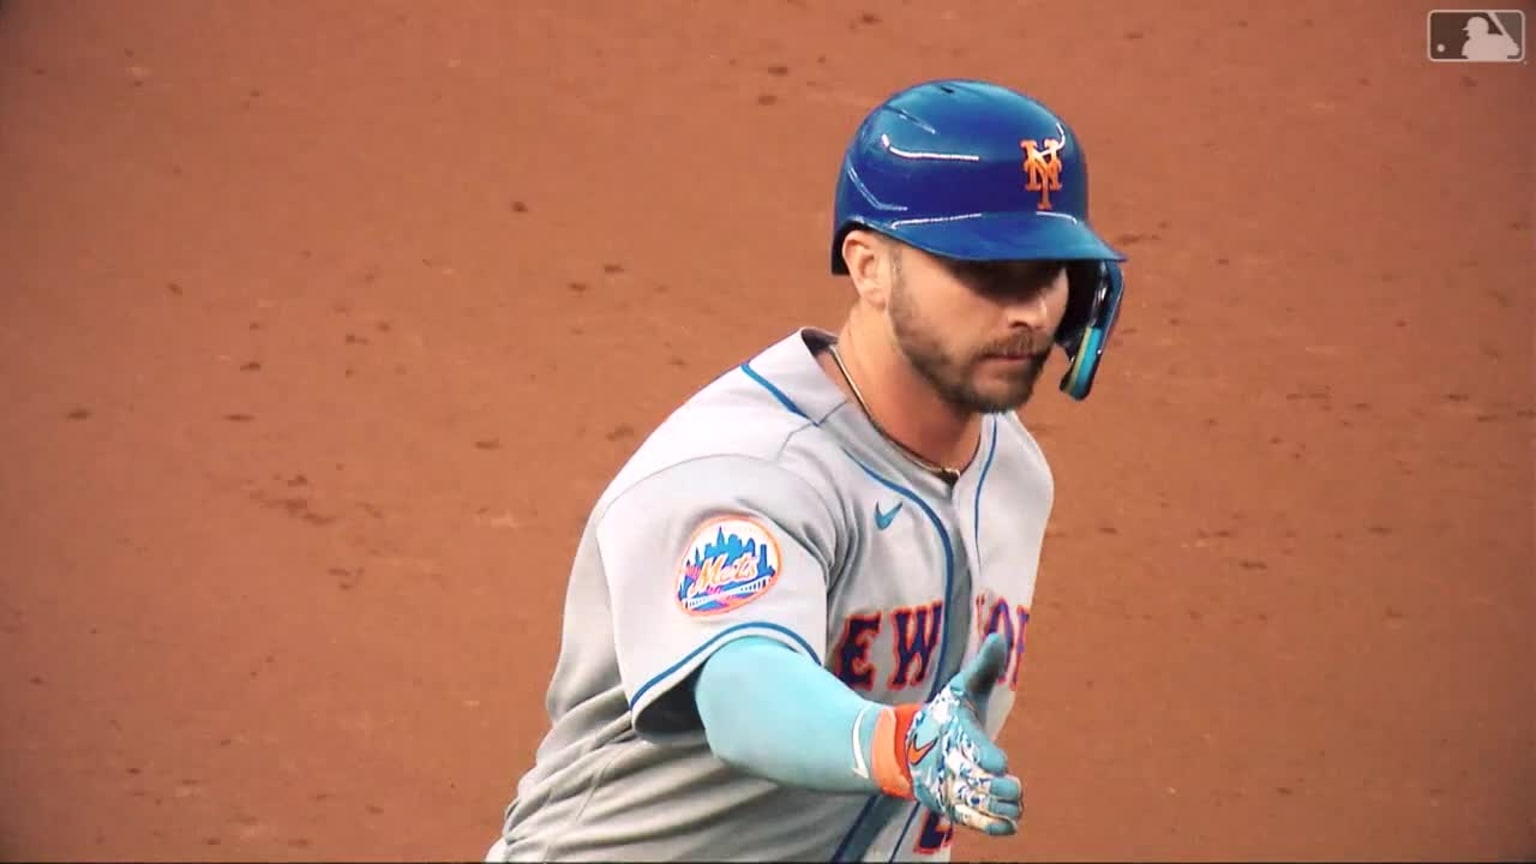 Pete Alonso Named NL Player of the Week - Metsmerized Online